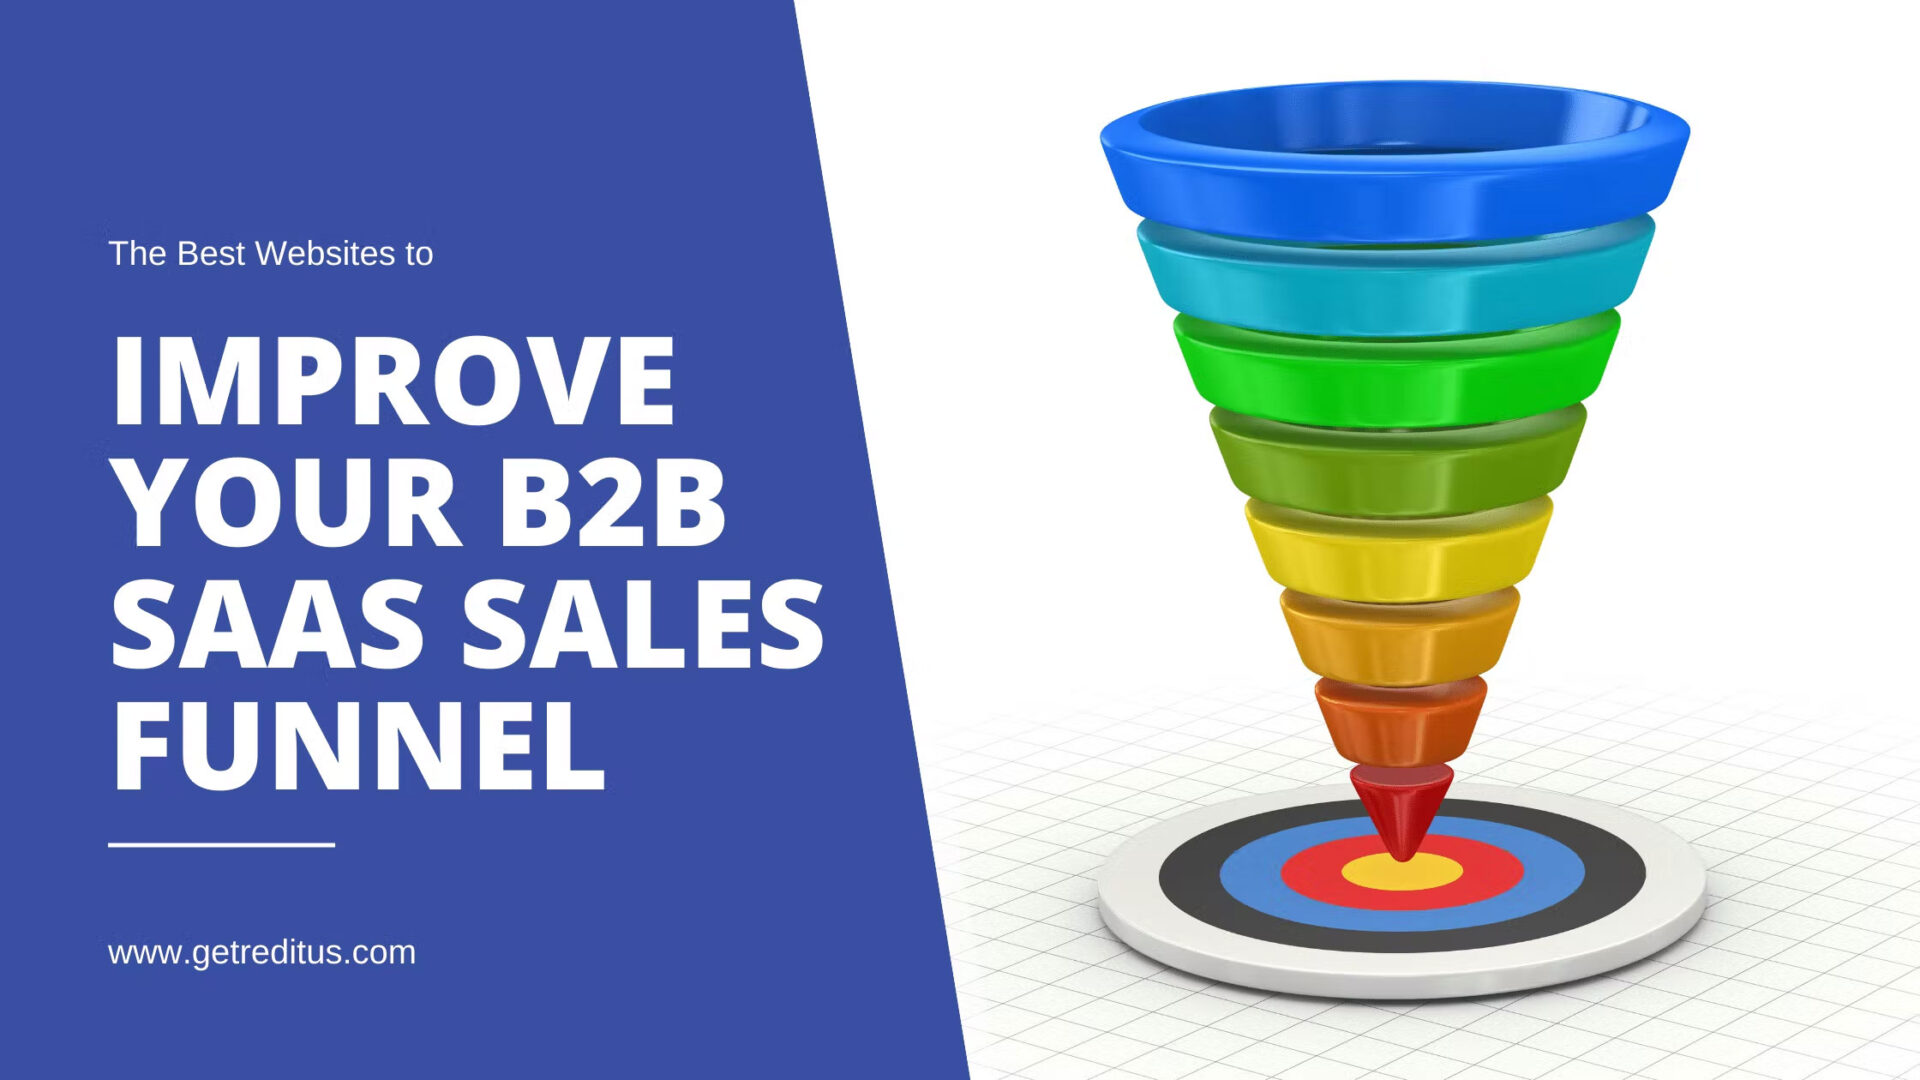 The Best Websites to Improve your B2B SaaS Sales Funnel